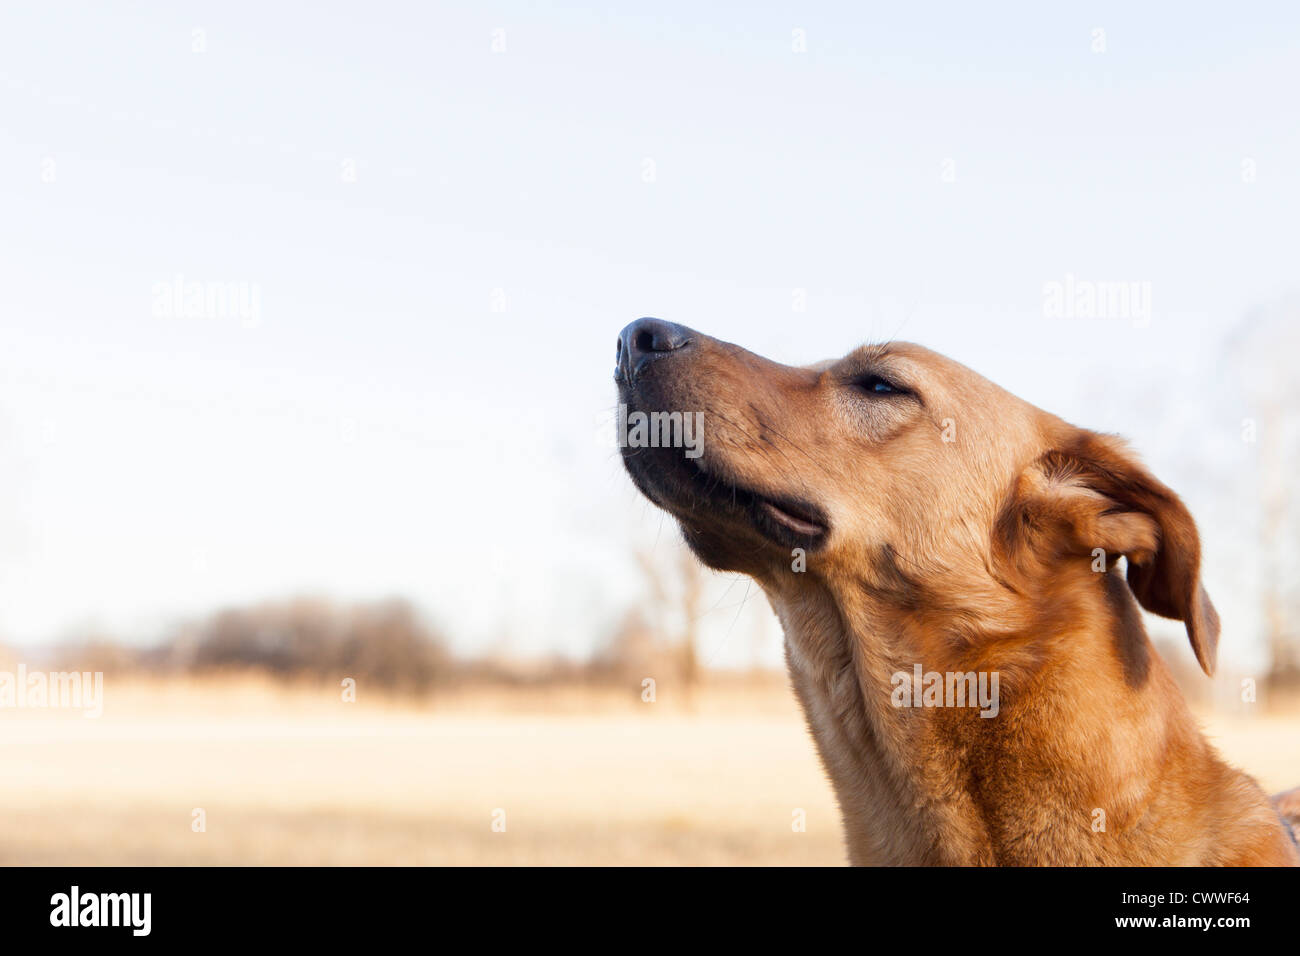 Close up of dogs face Stock Photo